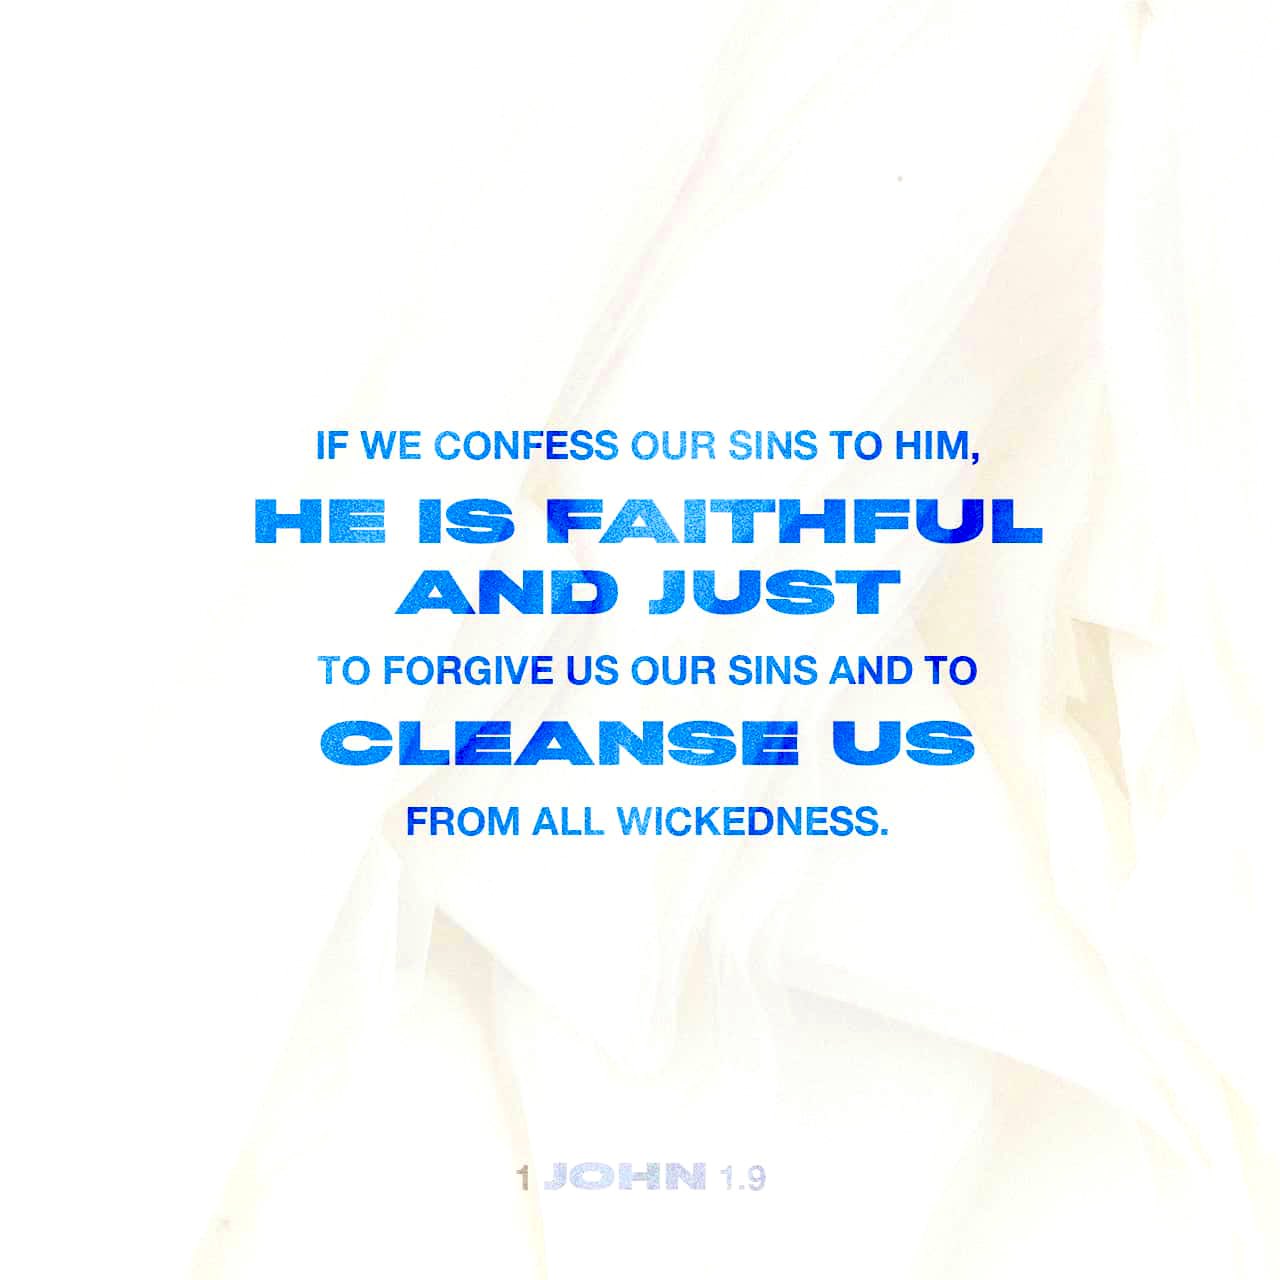 IF WE CONFESS OUR SINS TO HIM; HE IS FAITHFUL AND JUST TO FORGIVE US OUR SINS AND TO CLEANSE US FROM ALL WICKEDNESS: JOHN 1.3